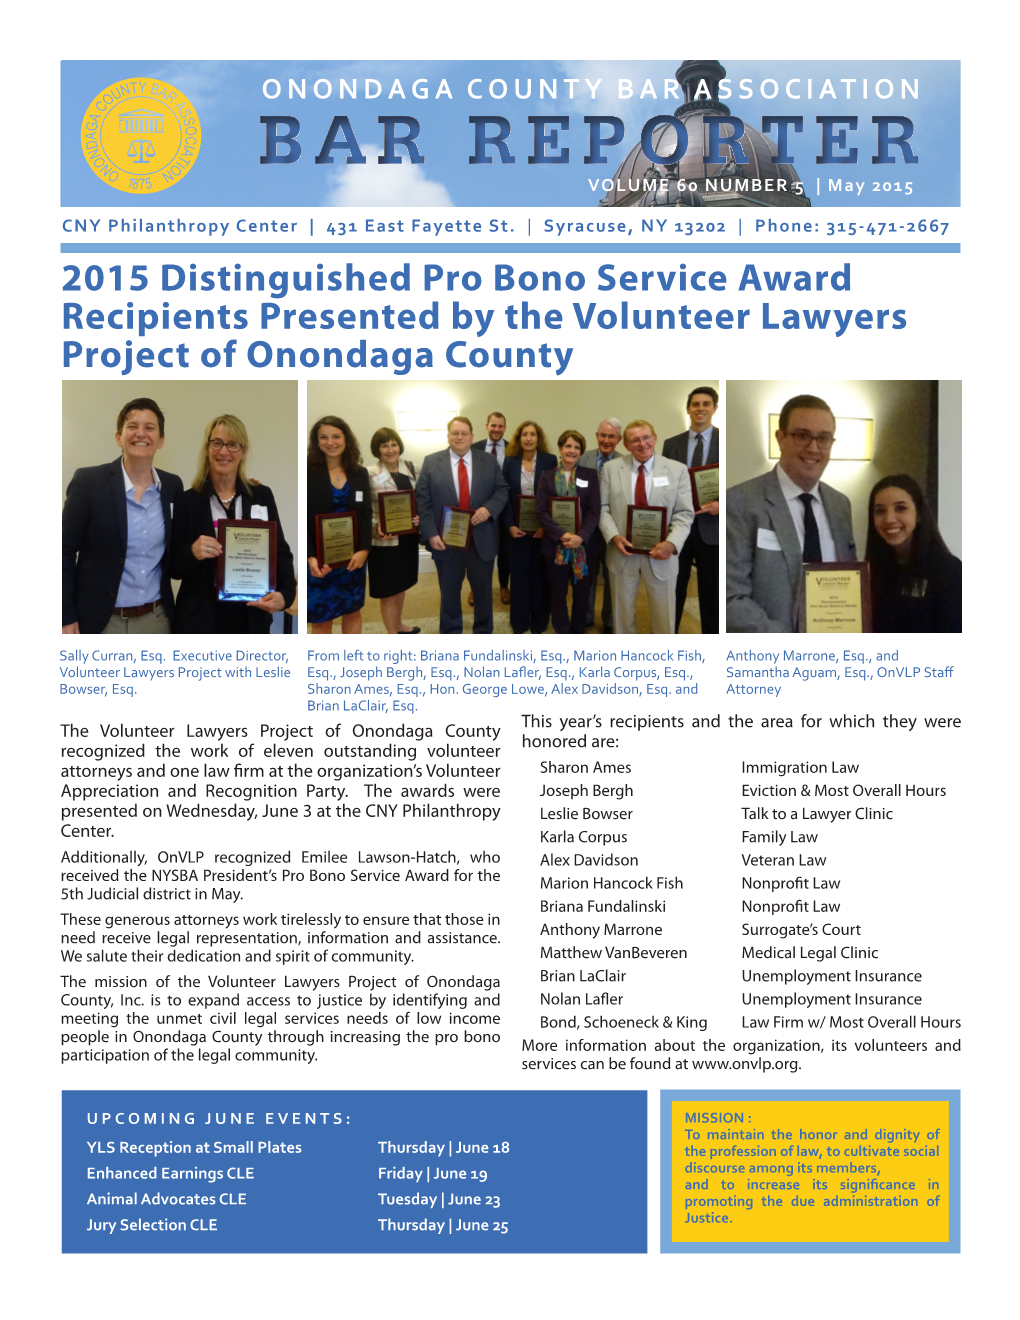 2015 Distinguished Pro Bono Service Award Recipients Presented by the Volunteer Lawyers Project of Onondaga County